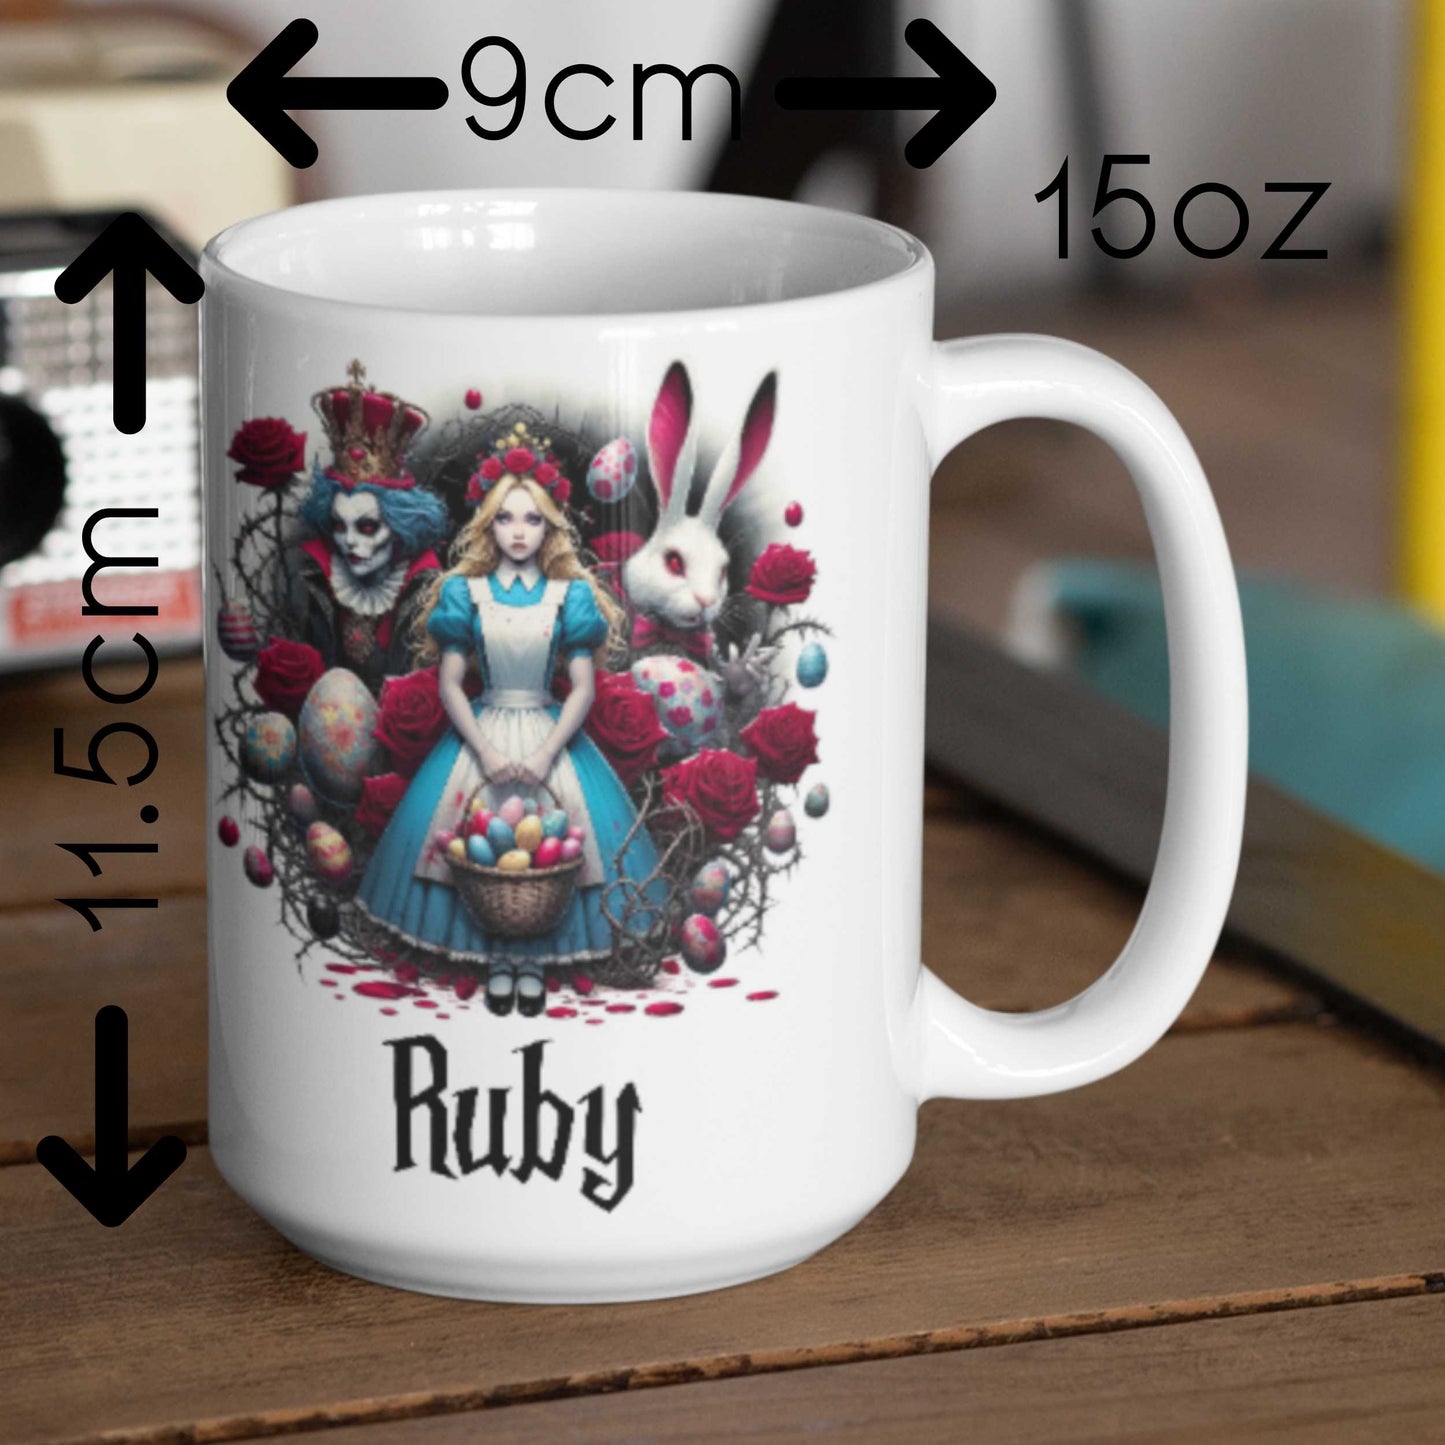 Easter Gifts | for Adults | for teens | Alice in Wonderland | Big Coffee Mugs | Gothic Gifts | Roses and Thorns | Alternative Gifts